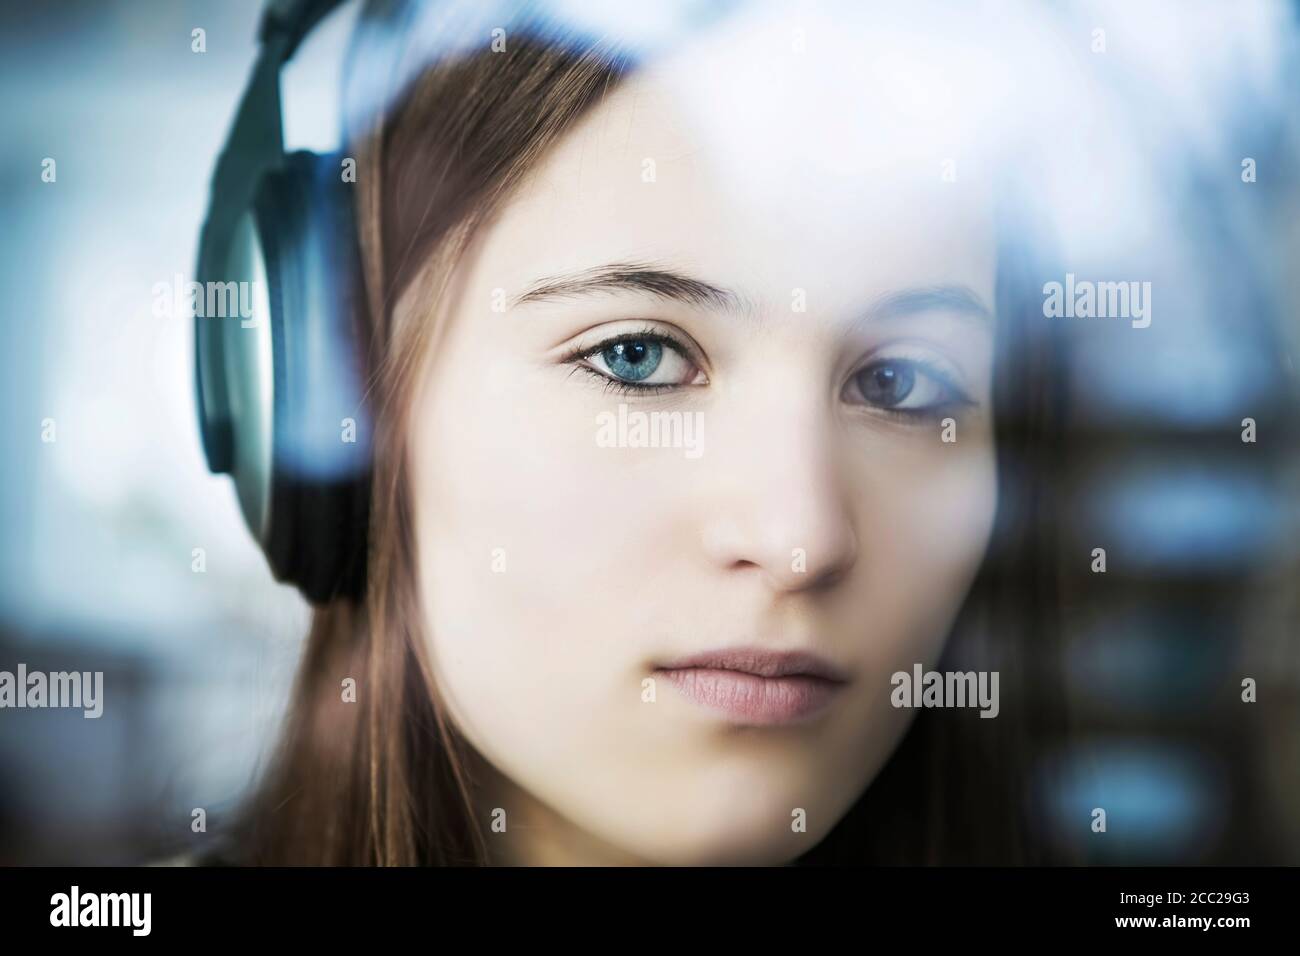 Germany, Cologne, Portrait of teenage girl listening music with headphones, close up Stock Photo